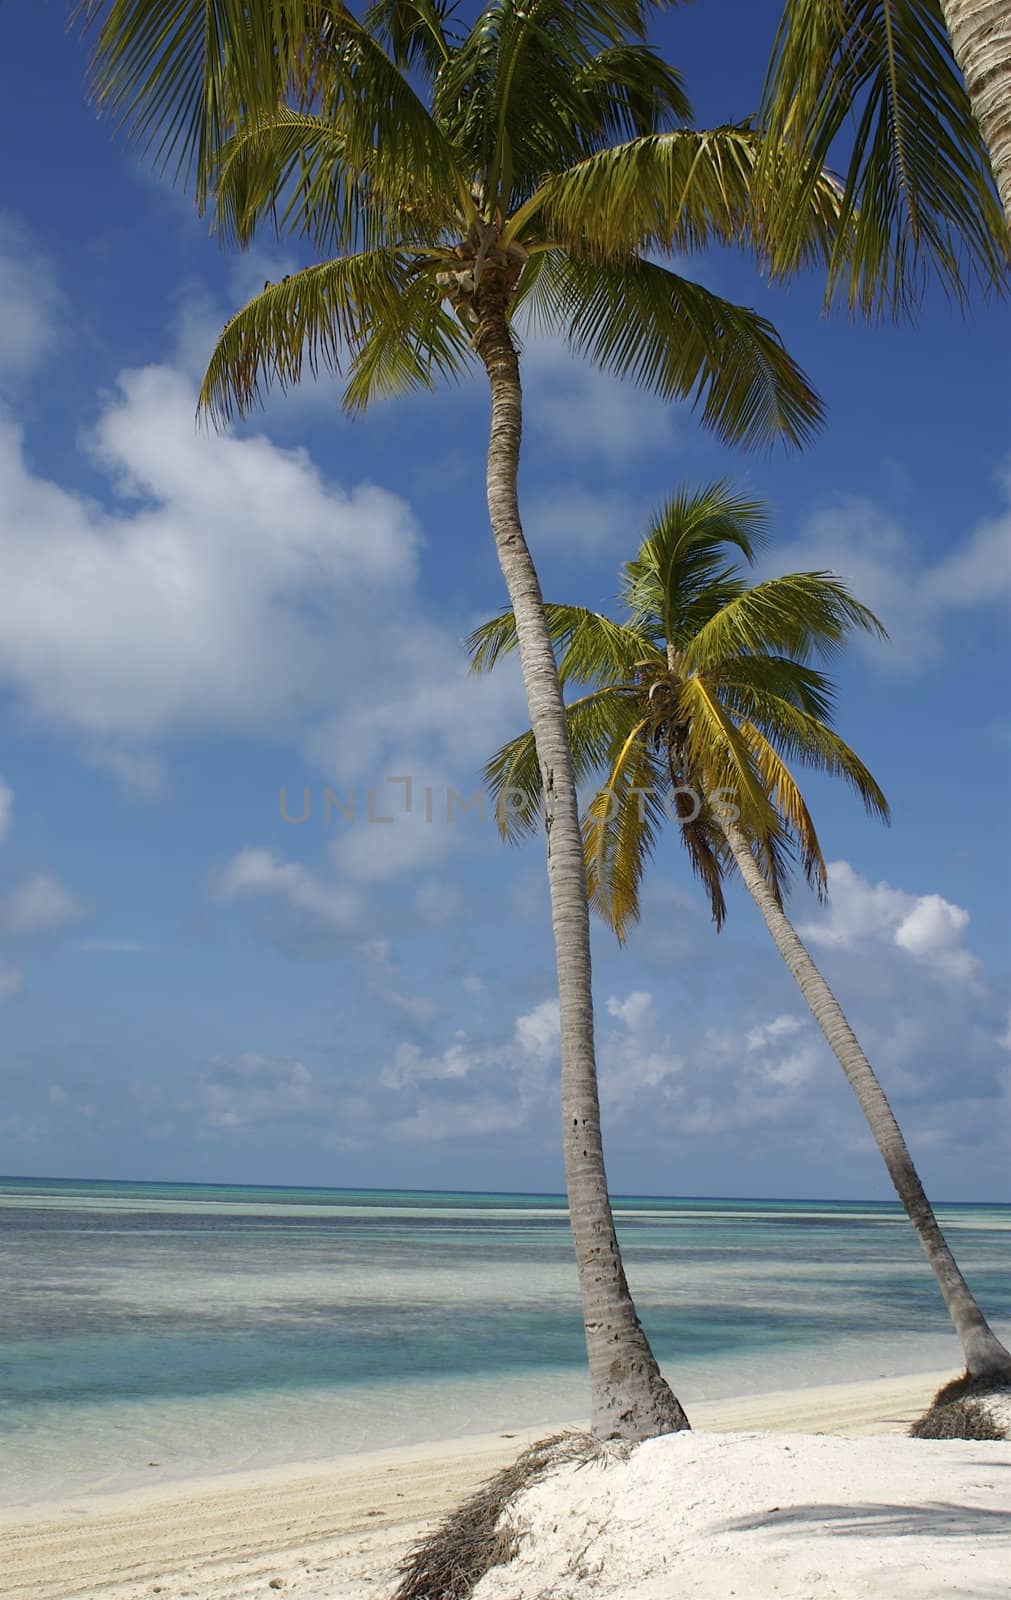 View of a placid Caribbean ocean through palm trees and across white sands, giving the impression of a deserted paradise island